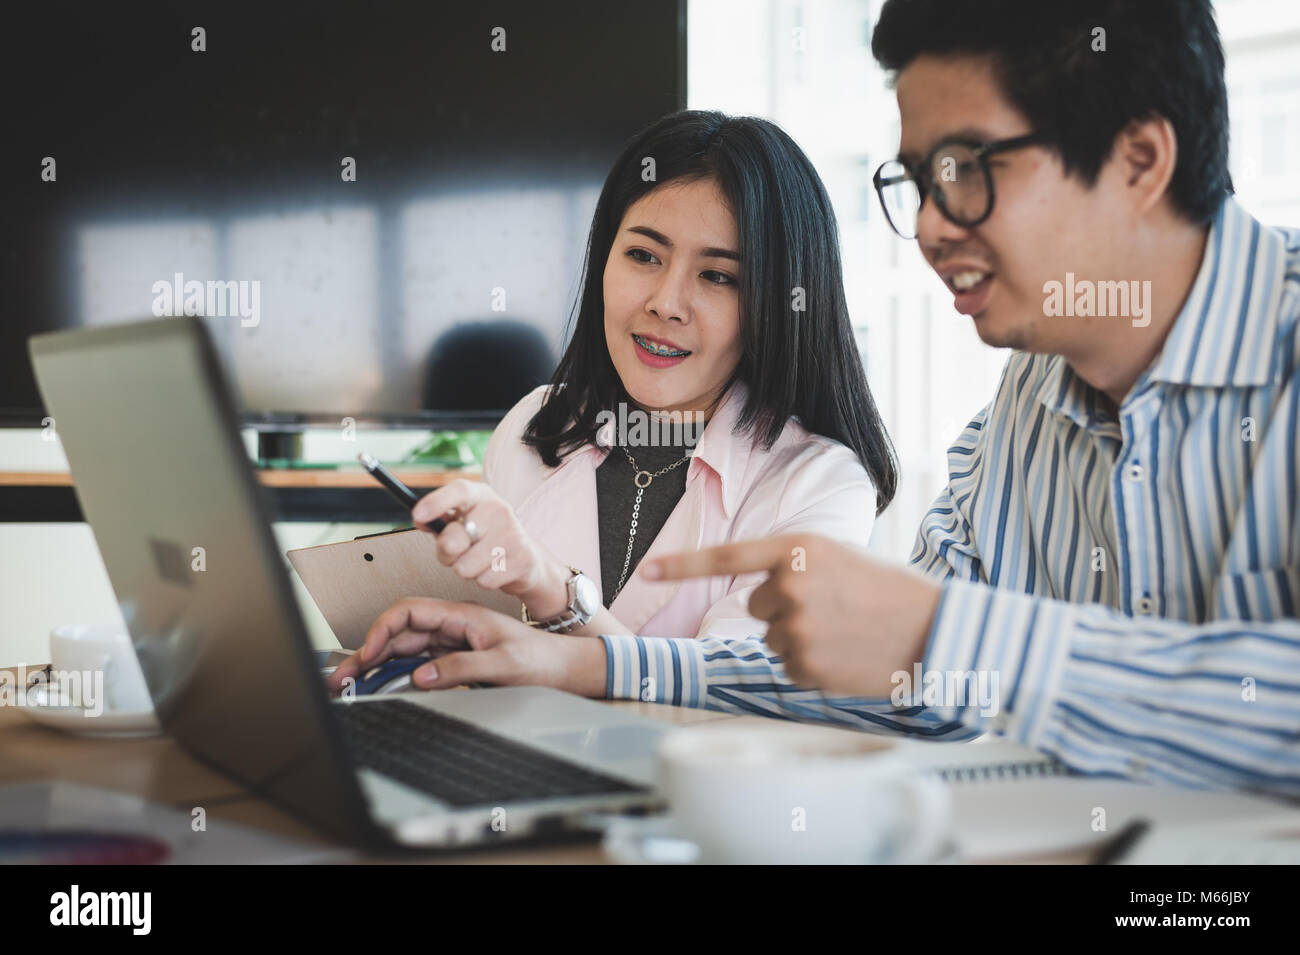 Young Asian businessman and businesswoman talking about their work while looking at laptop monitor in meeting room. Startup business teamwork concept. Stock Photo